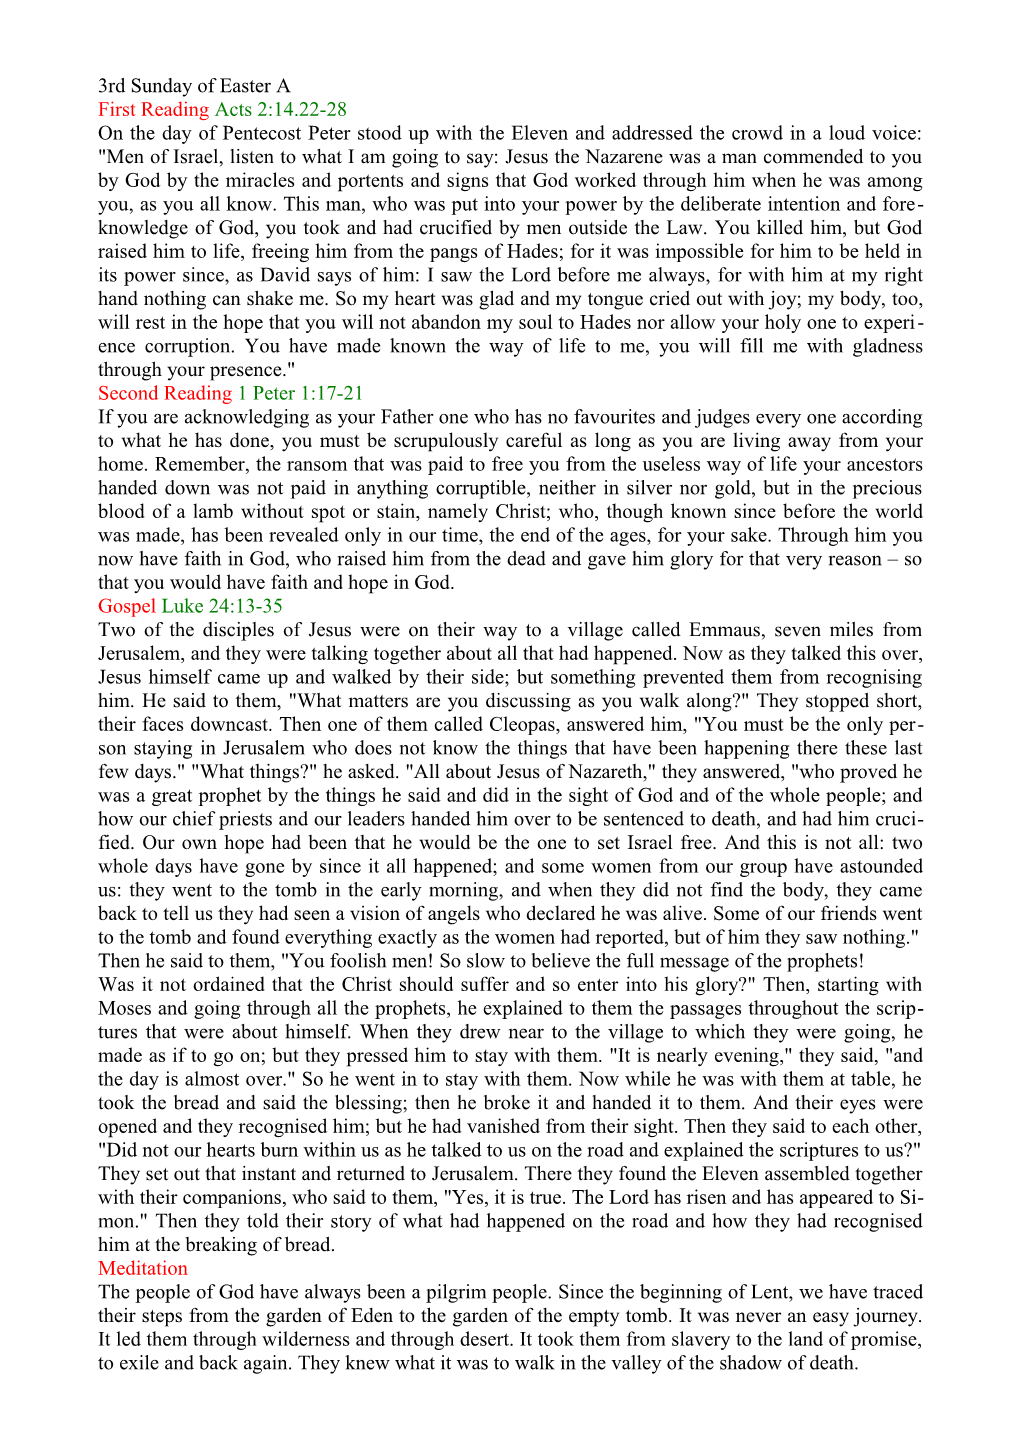 First Reading Acts 2:14.22-28